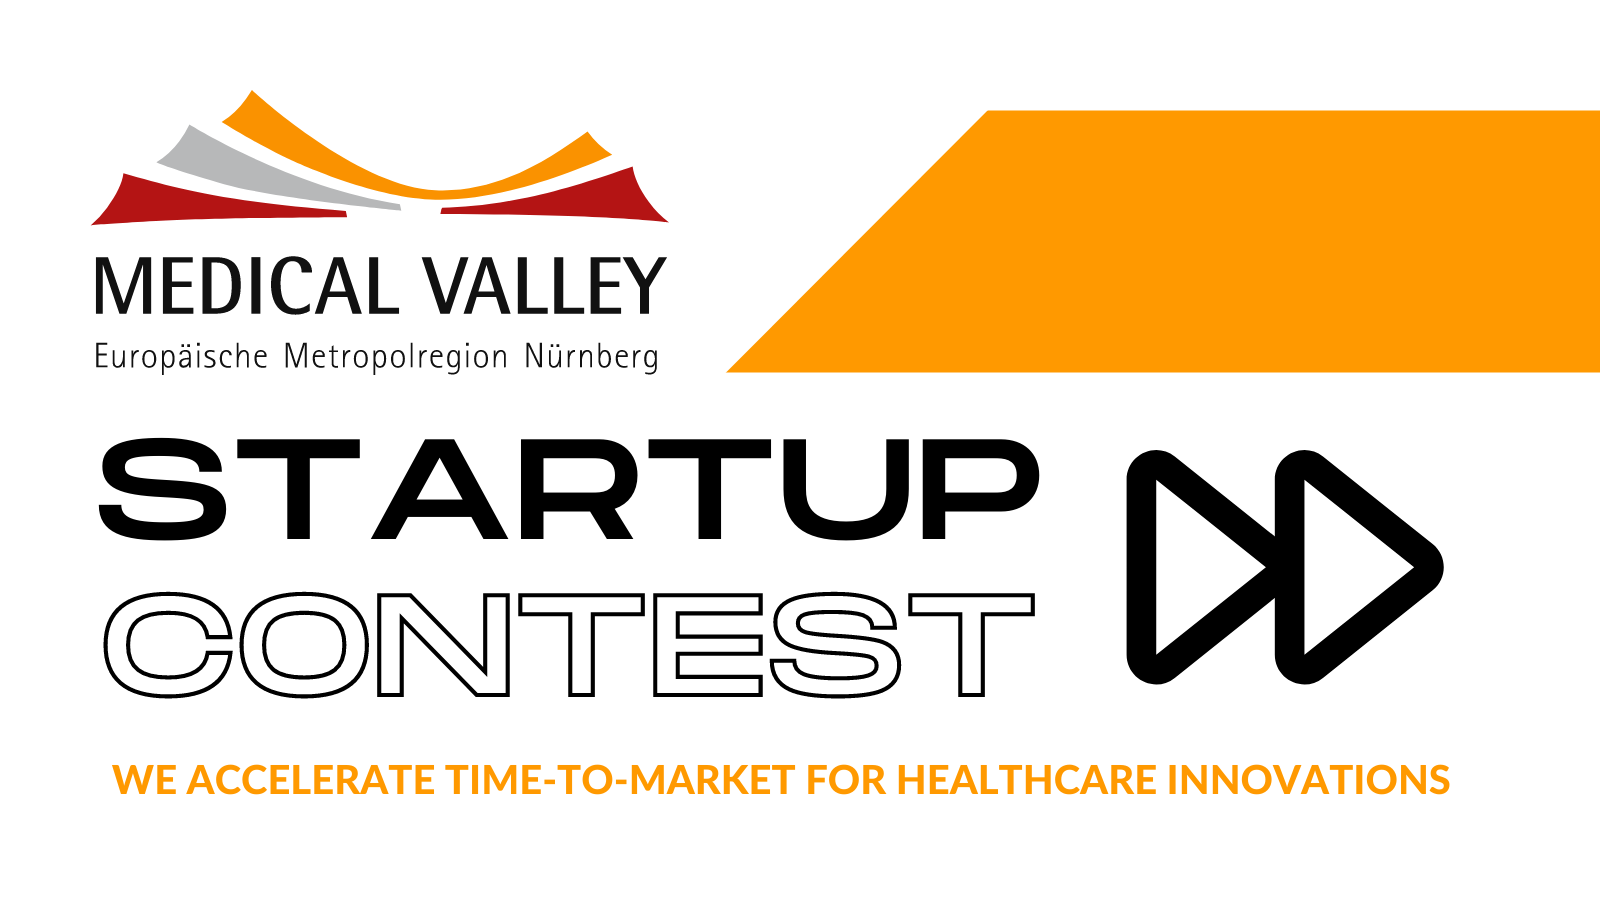 Medical Valley Startup Contest – We accelerate time-to-market for healthcare innovations!